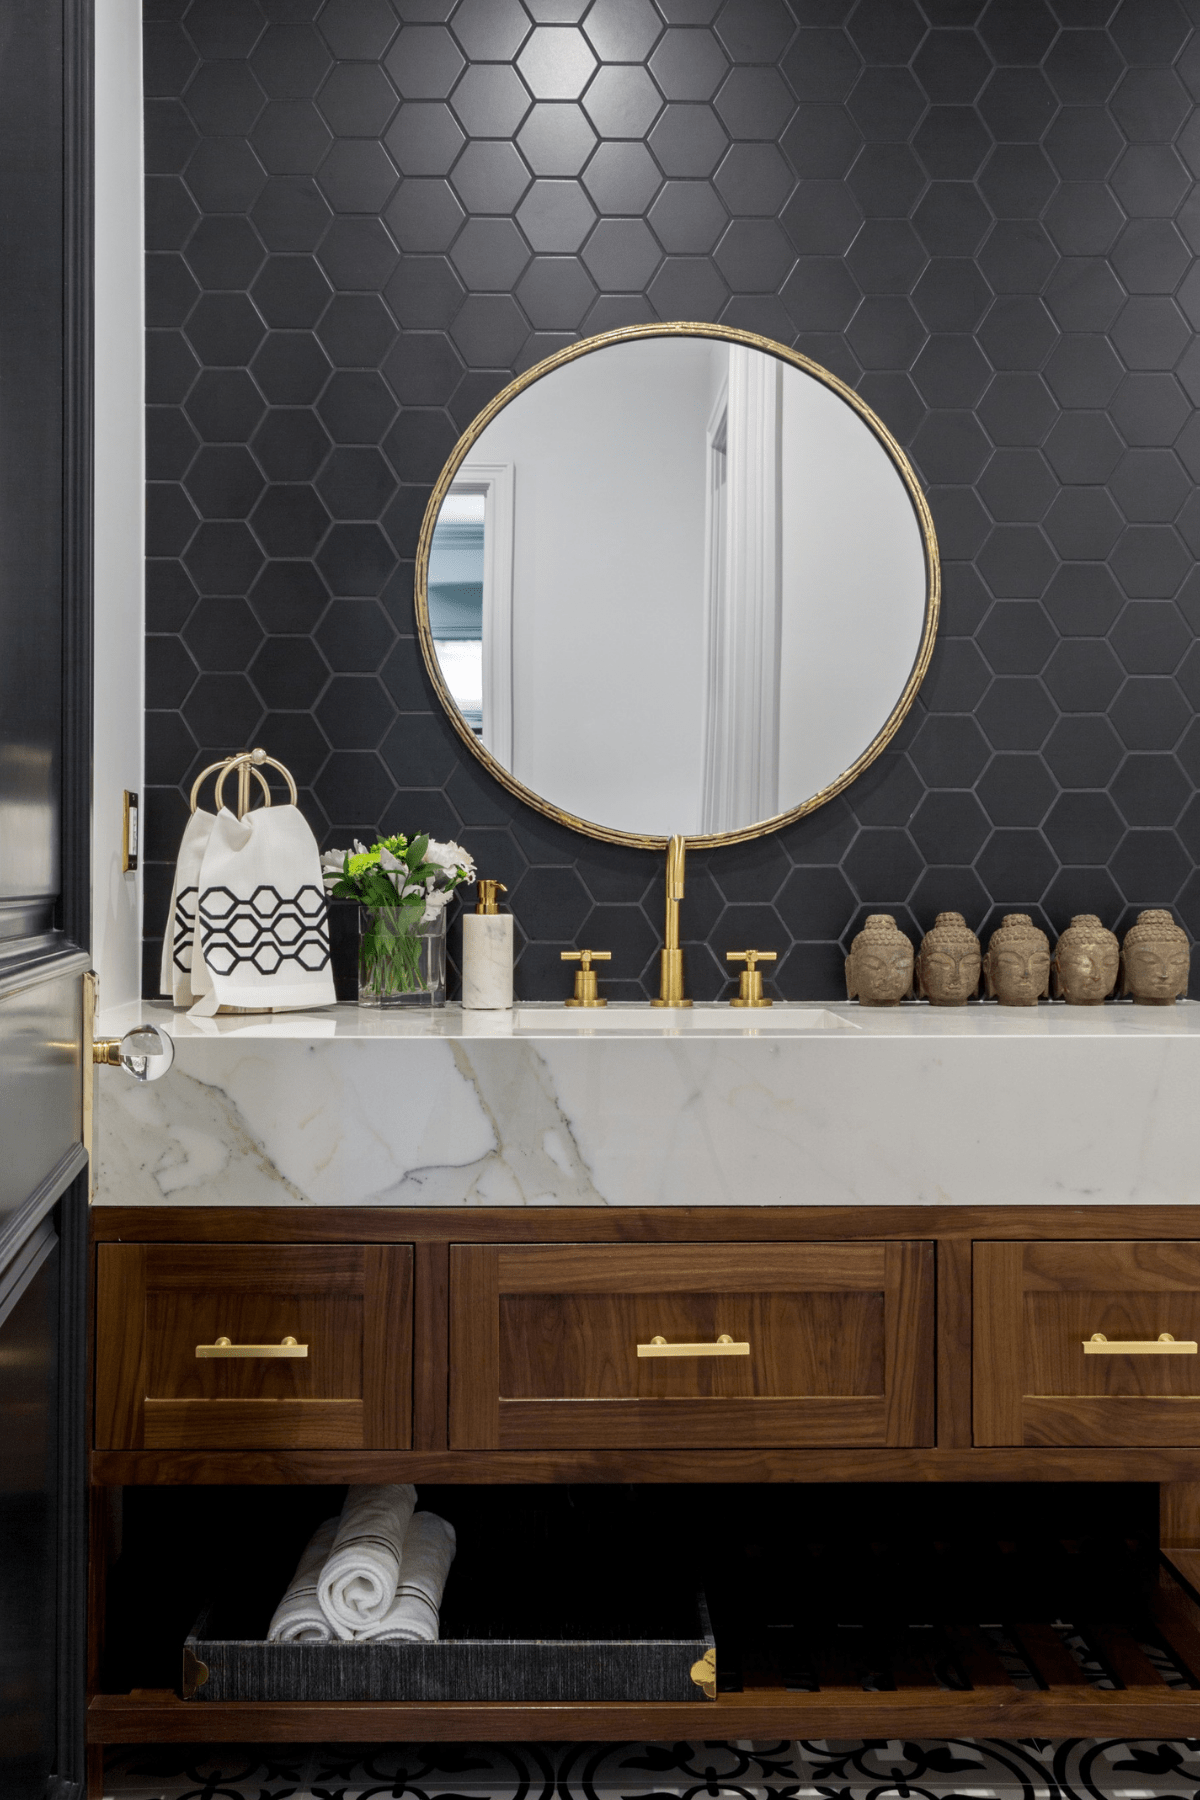 A marble top counter and wooden cabinetry against honeycomb wallpaper in the Encino bathroom.